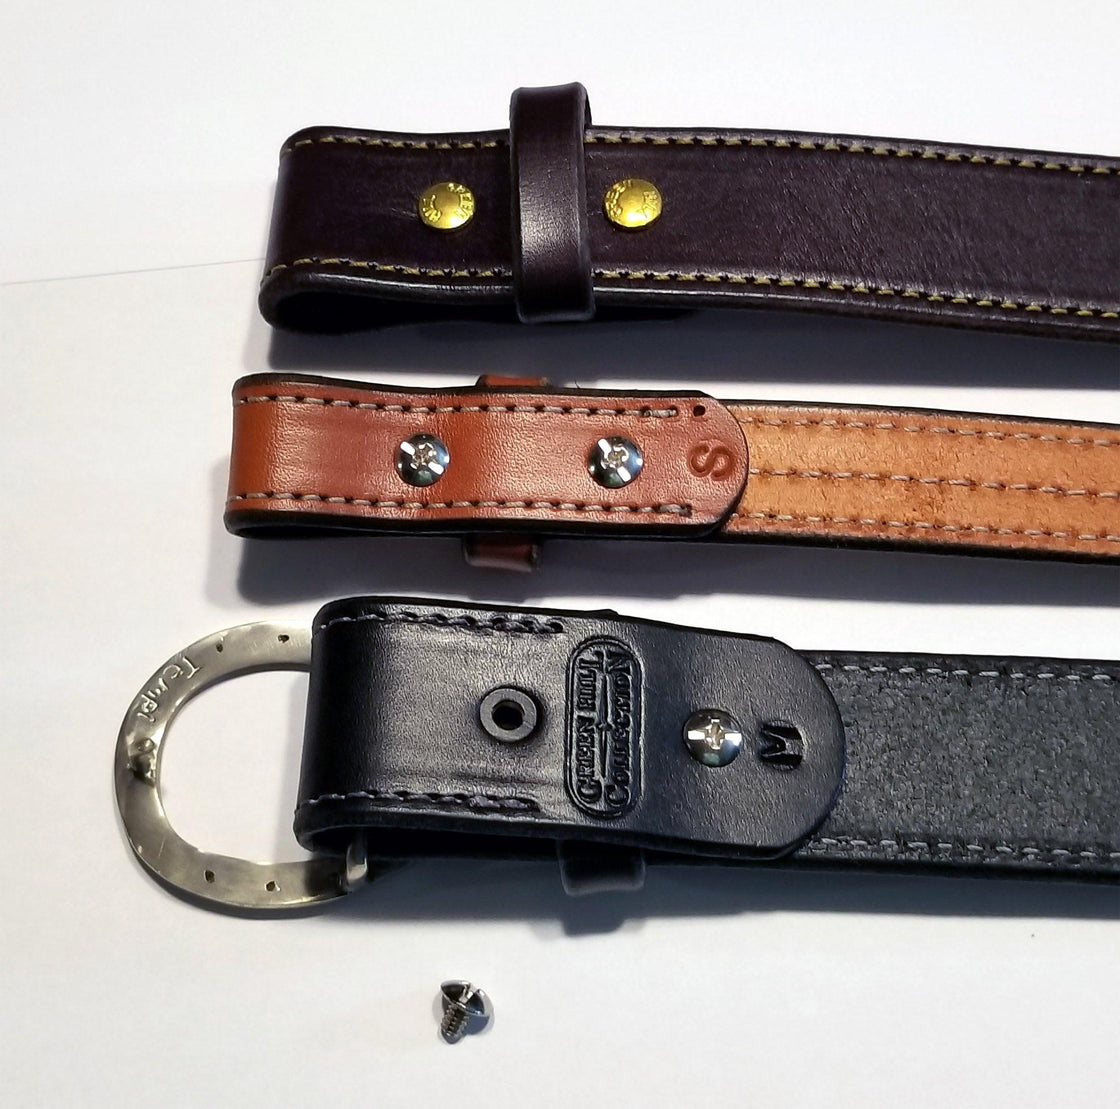 Bridle Leather Belts with stitching 1.5 inch wide - Tempi Design Studio